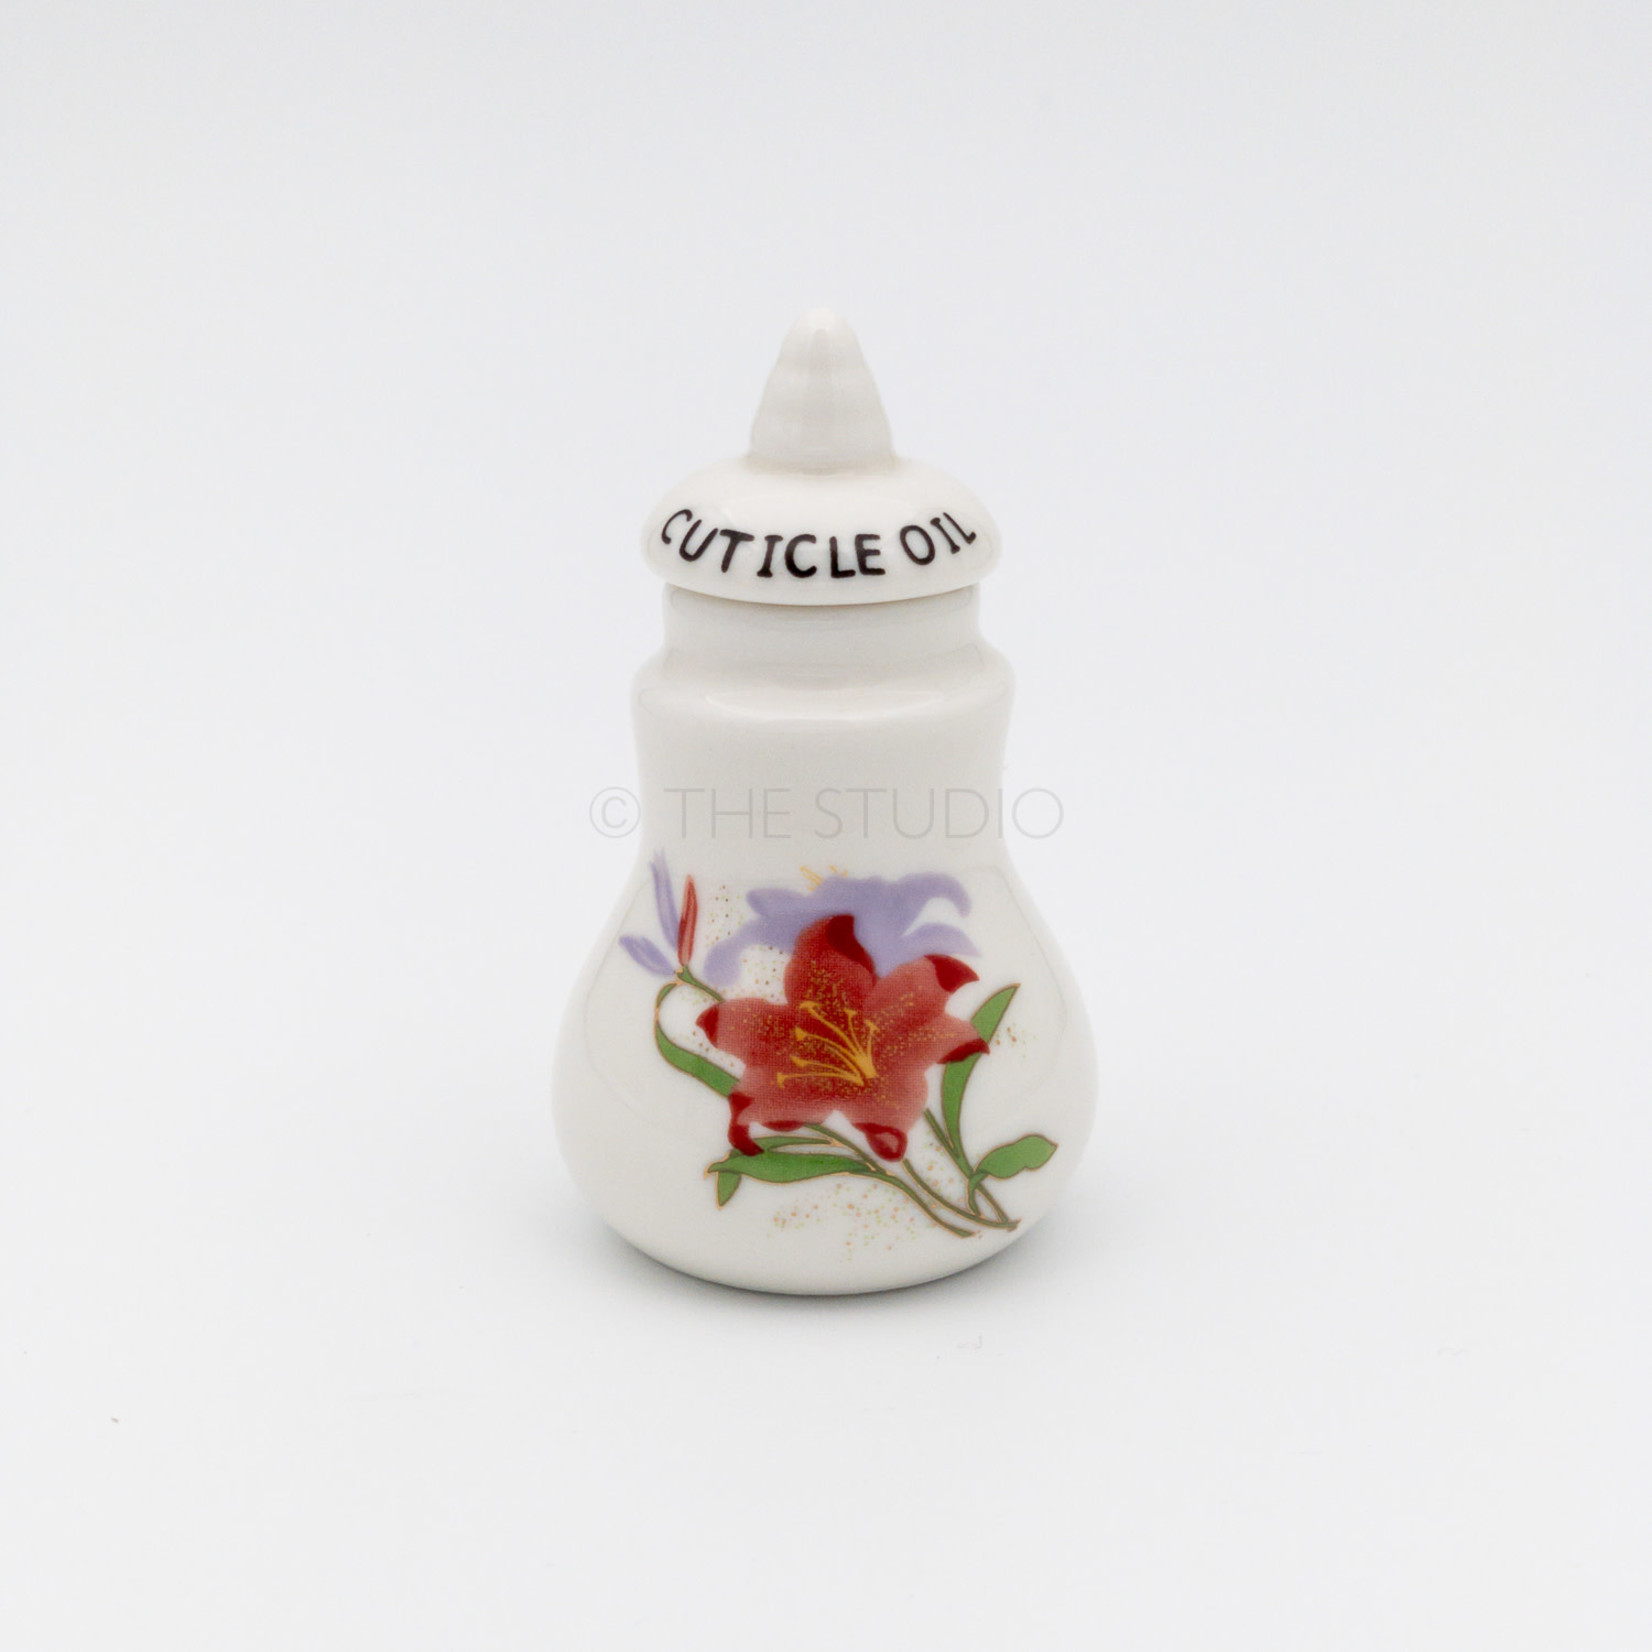 DL - Cuticle Oil Jar with Brush - Small Ceramic